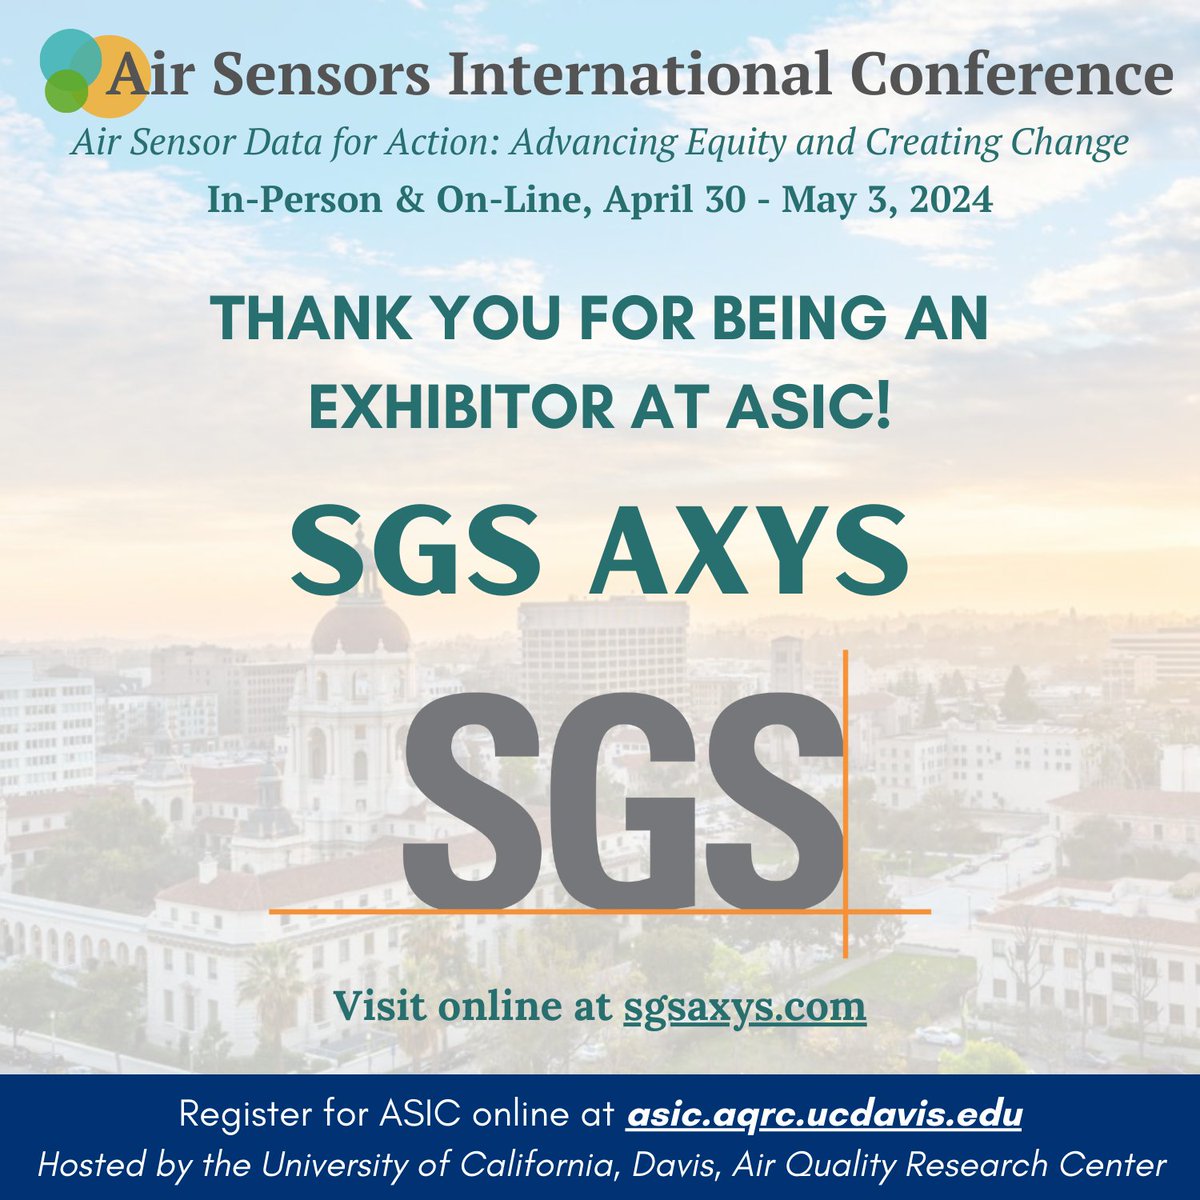 Thank you to SGS AXYS for being an exhibitor at ASIC California 2024! Learn more about them at sgsaxys.com @SGS_SA #ASIC2024 #airquality #airsensors #lowcostsensors #communityscience